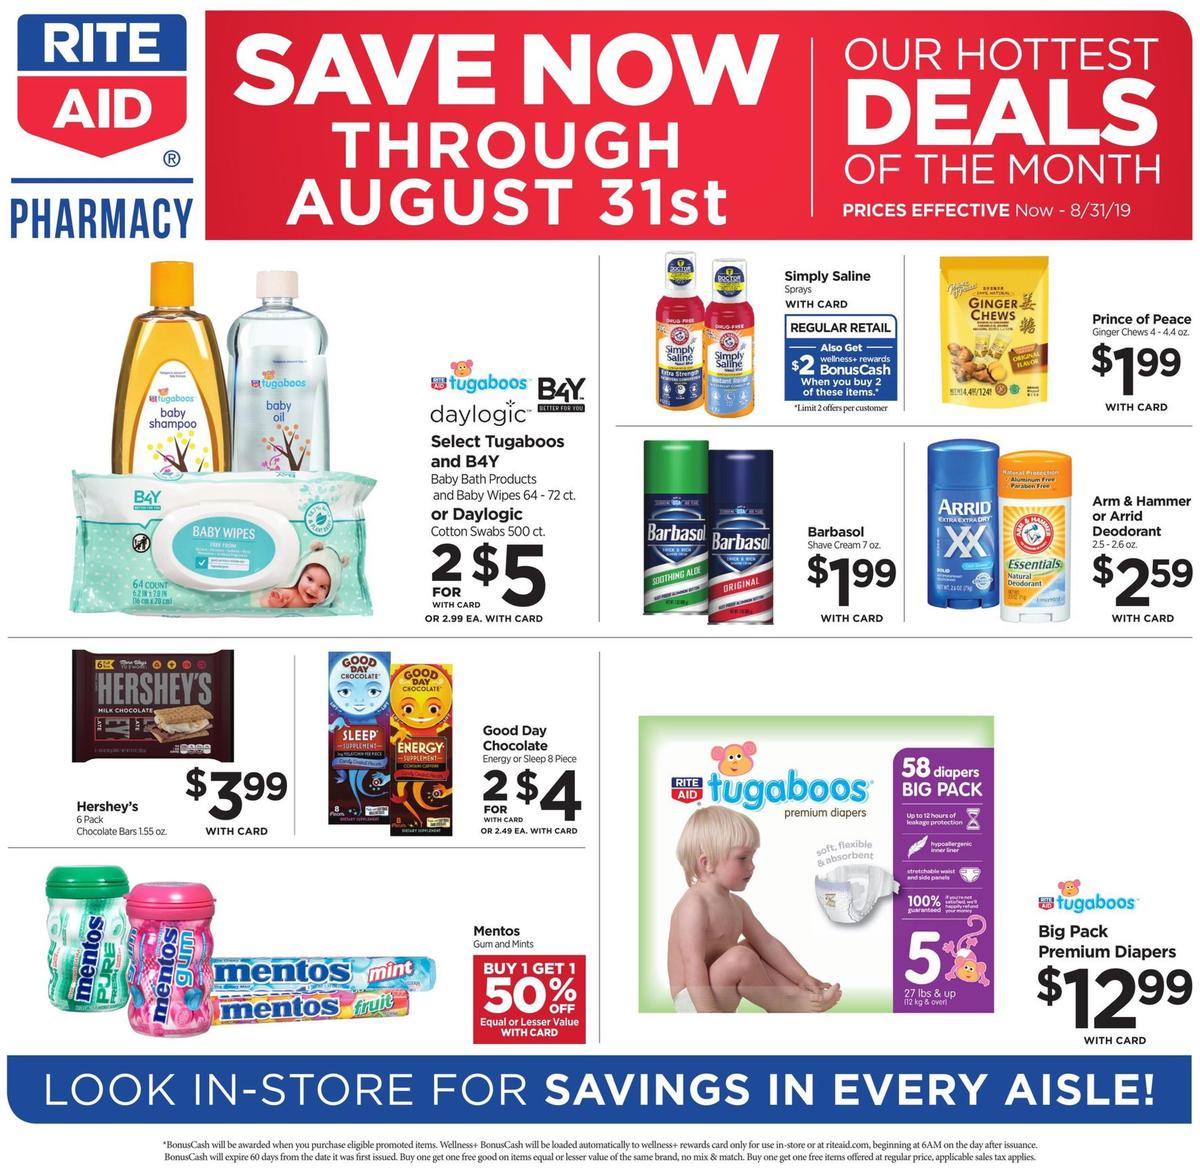 Rite Aid Save Now through August 31st! Weekly Ad from August 11